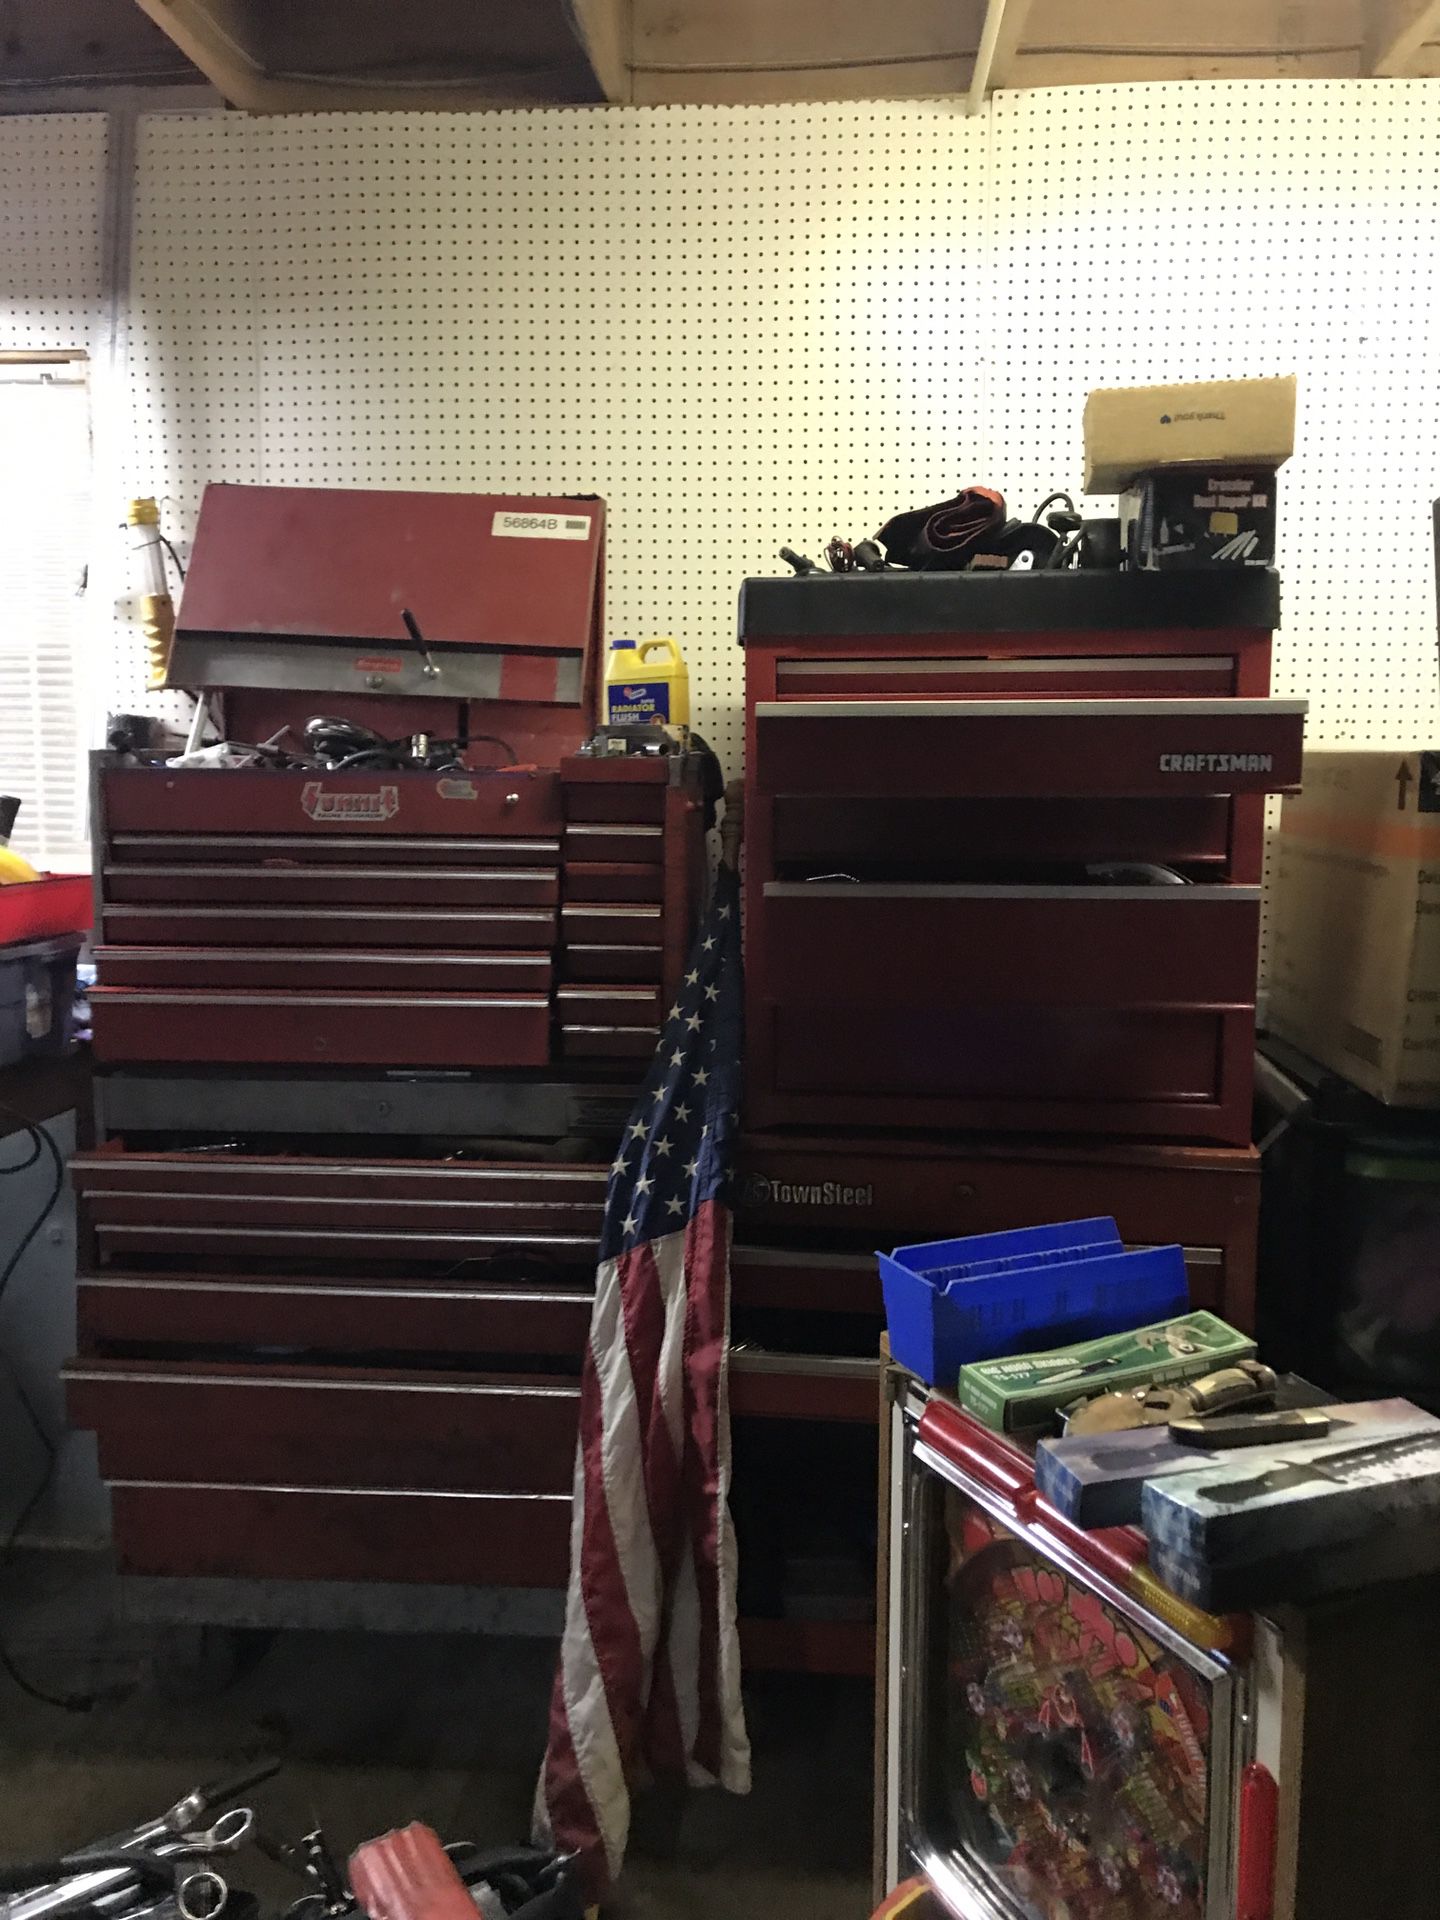 Shop Tool Boxes , Exercise Equipment Boxing Gloves , Car Ramps ,5th Wheel And Rails , Old Time Pinball Game, And Other Items Tomuch To List 